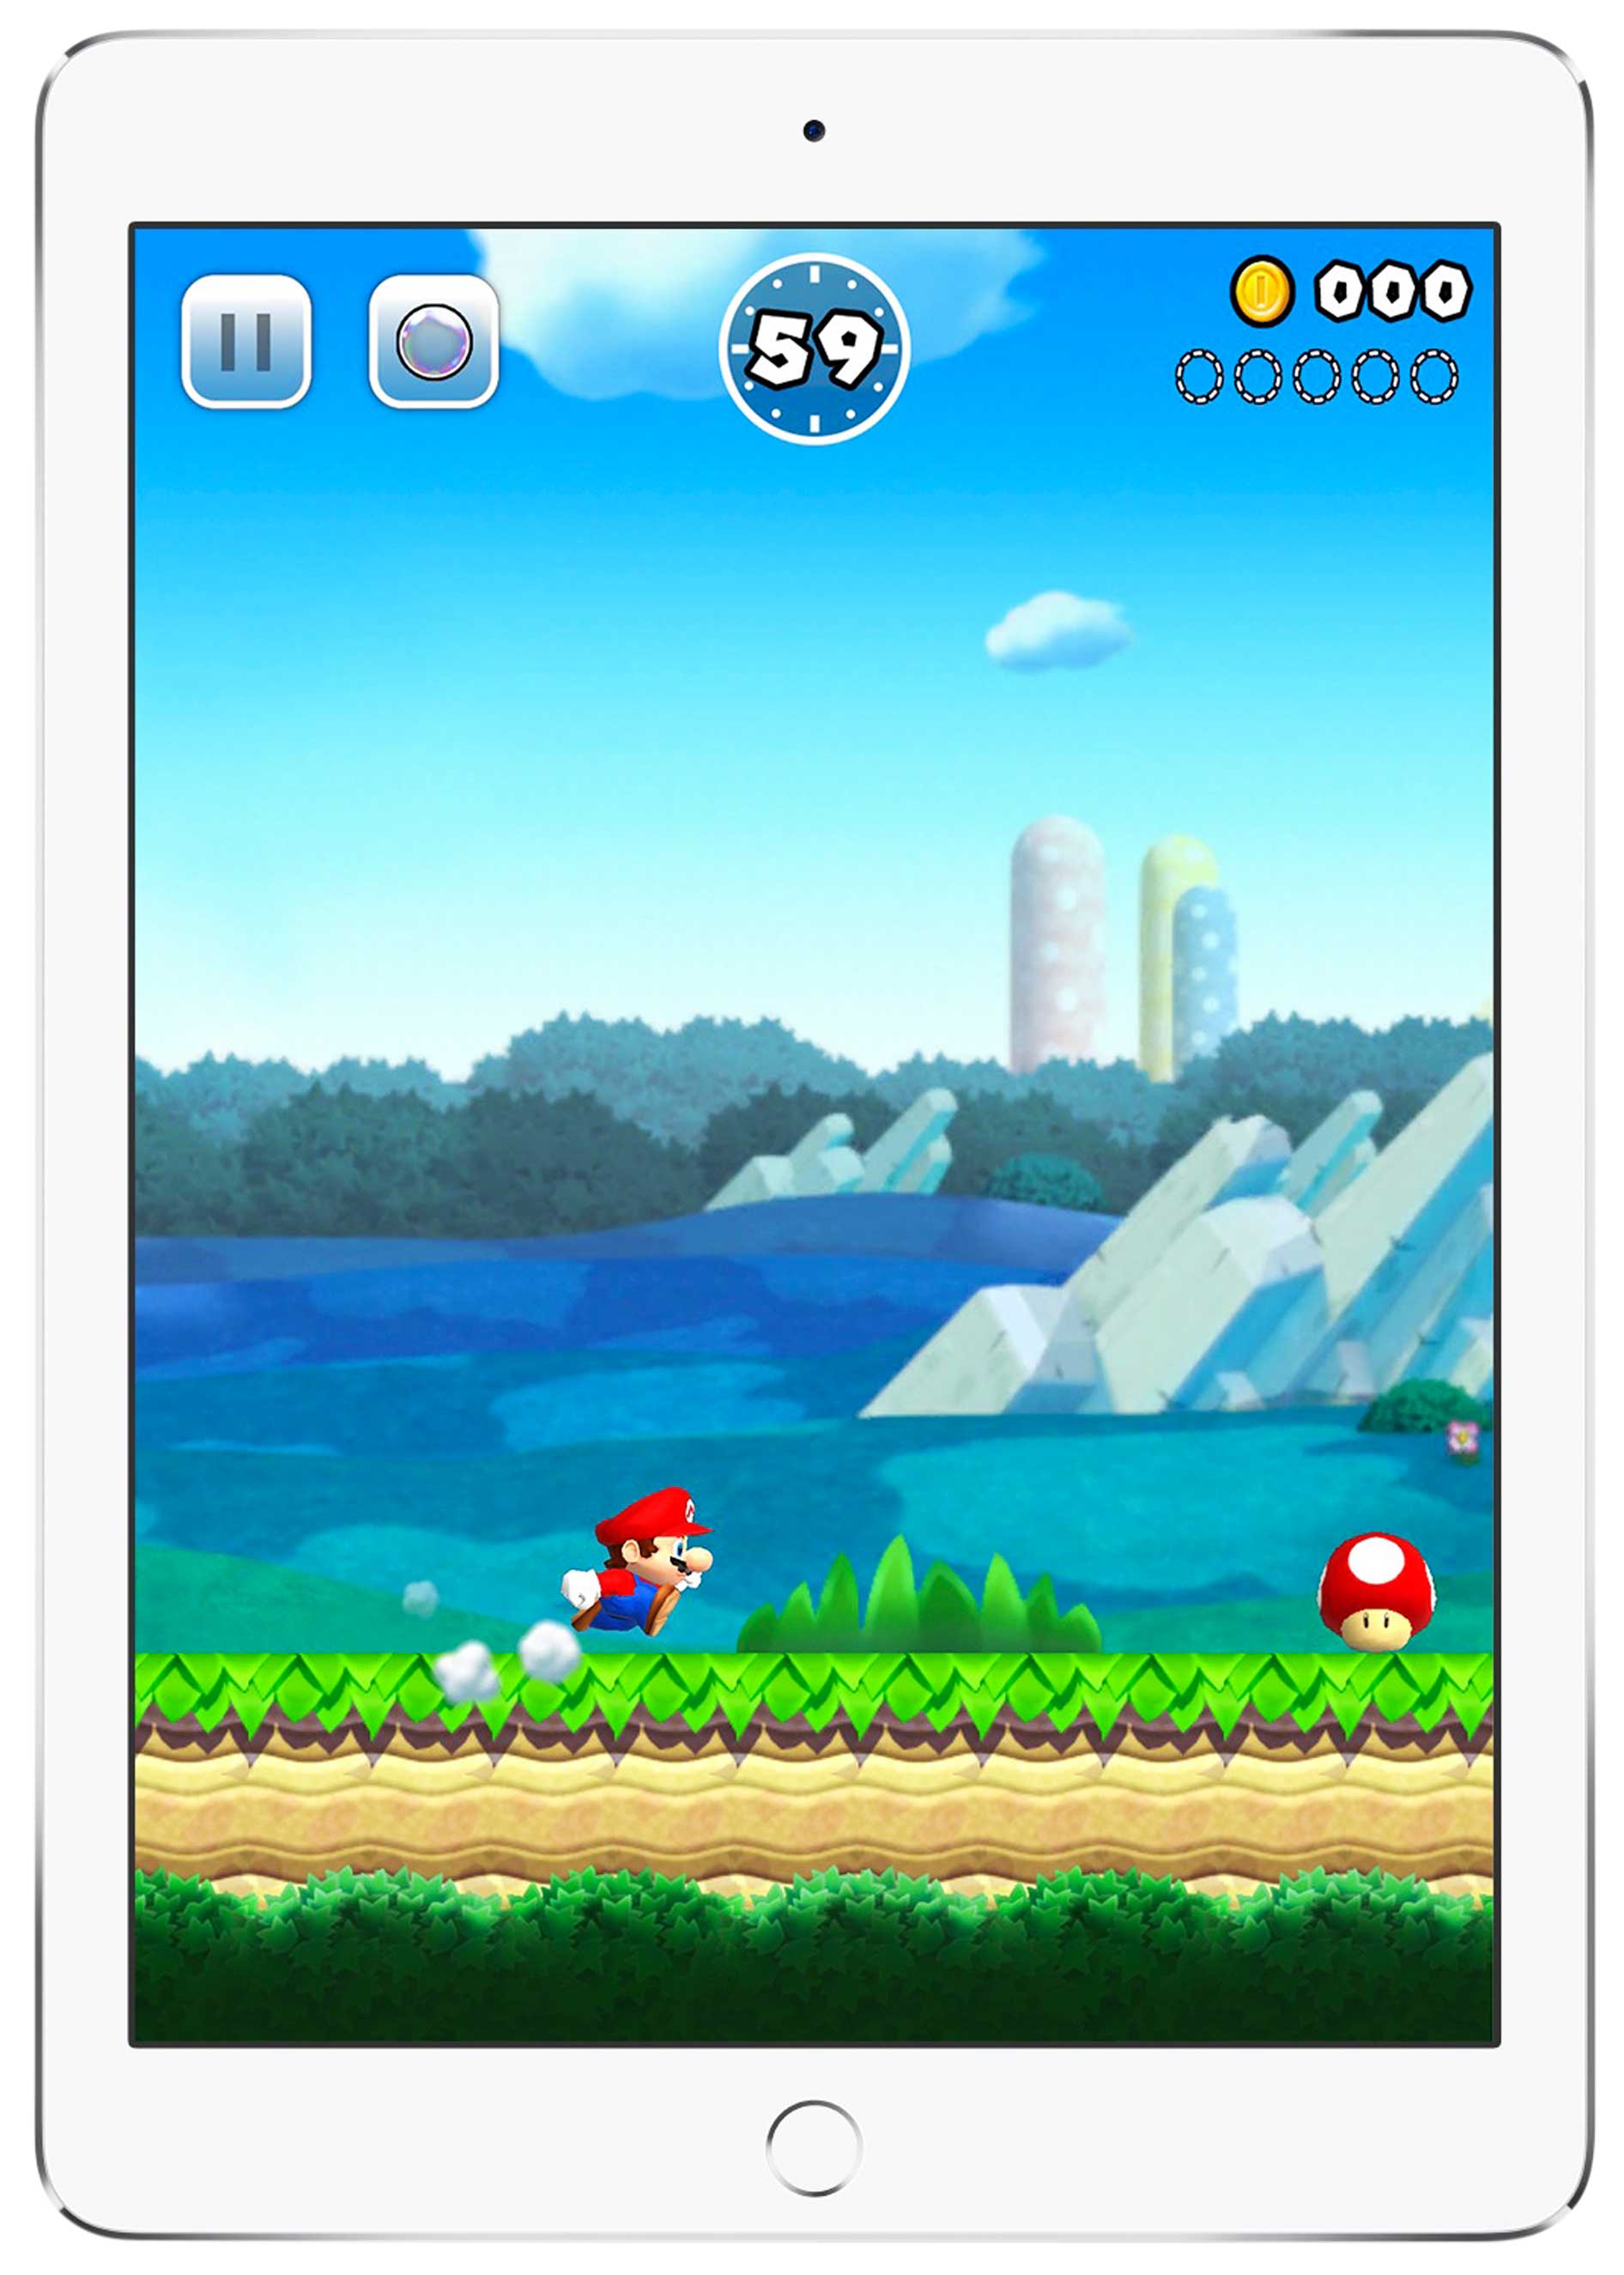 Nintendo’s first Mario game for iPhones and iPads proves the firm can create fun on mobile gadgets (Nintendo)